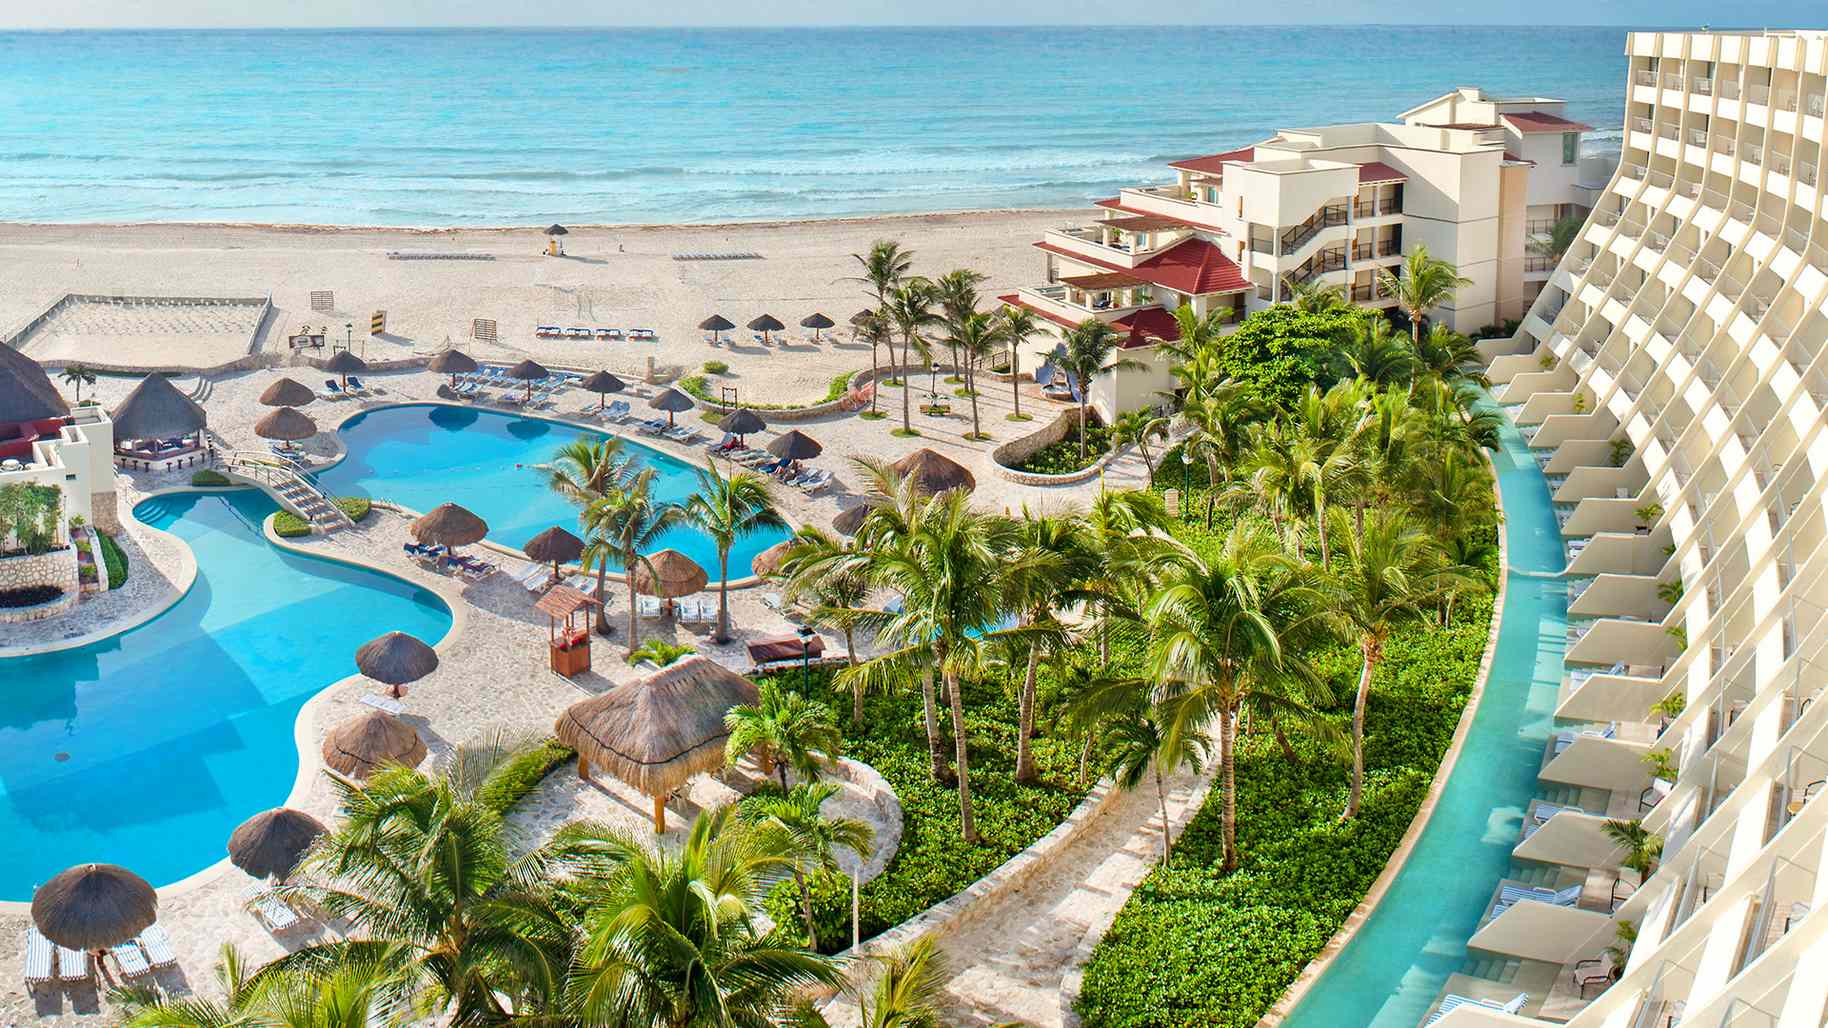 THE MOST OF YOUR VACATION AT GRAND PARK ROYAL CANCÚN - Vacation Club